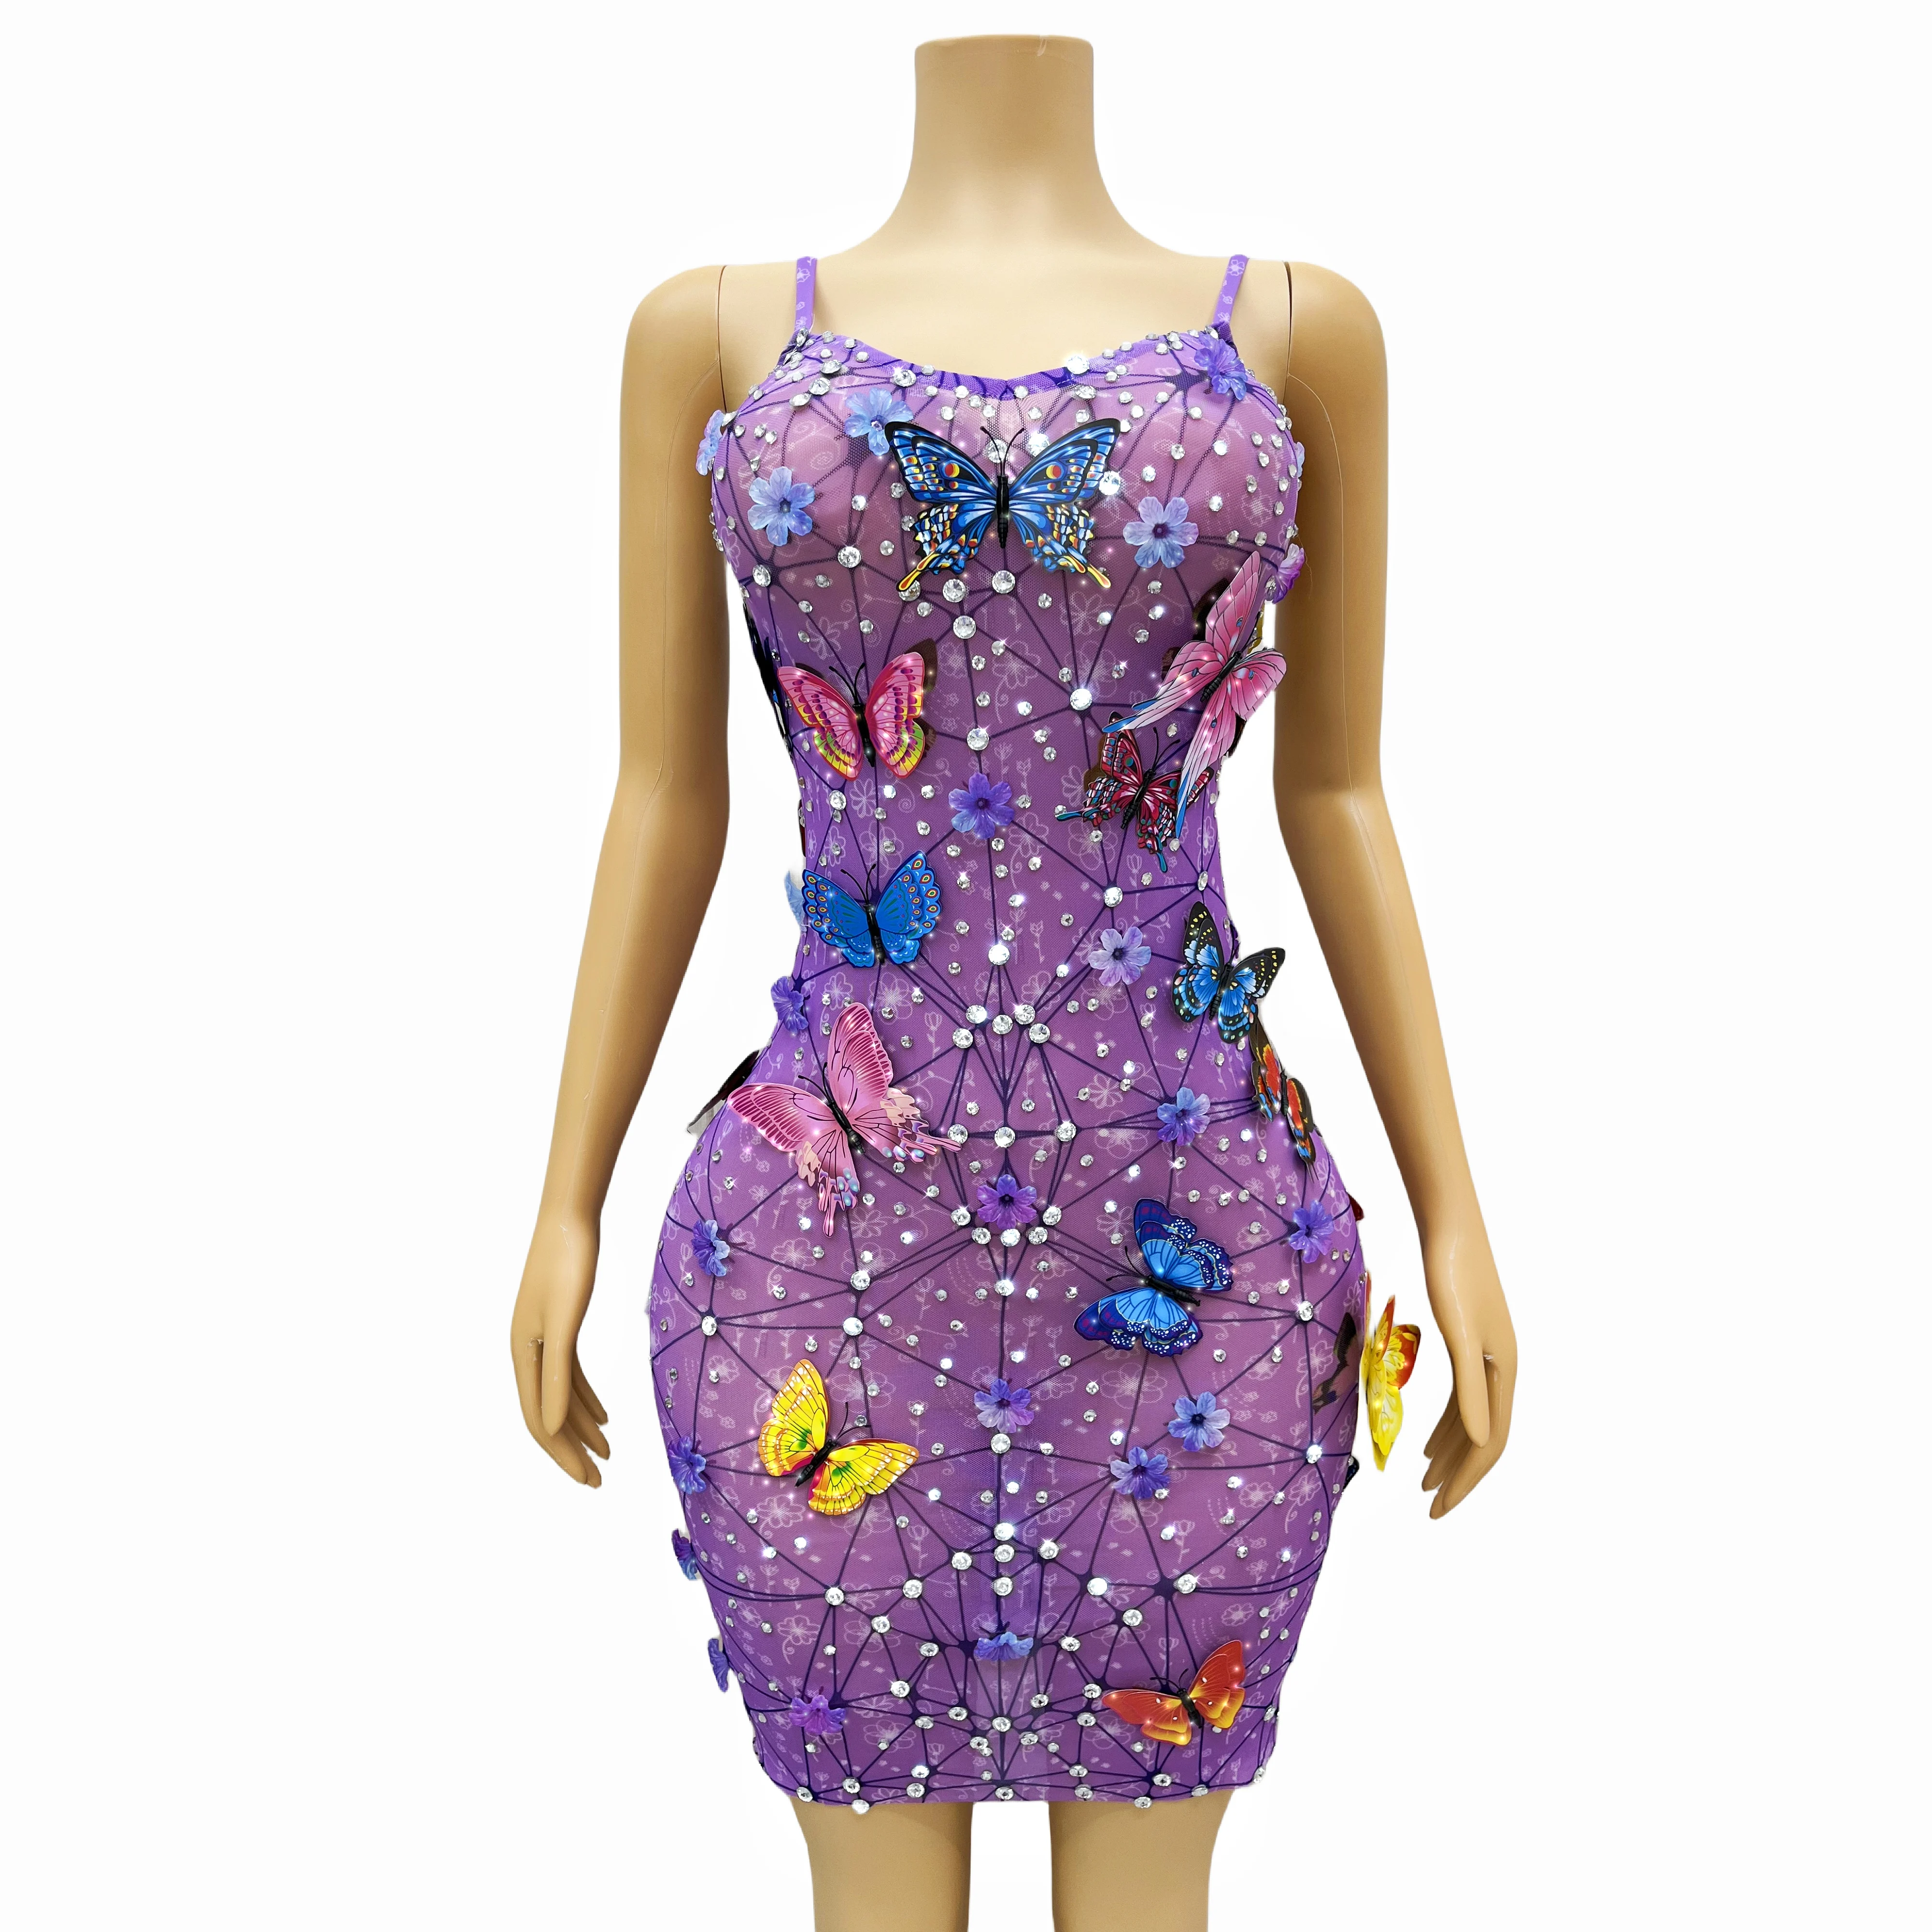 

Flashing Lovely Butterfly Rhinestones Flowers Dress Purple Transparent Birthday Celebrate Costume Sexy Fancy Outfit pudie